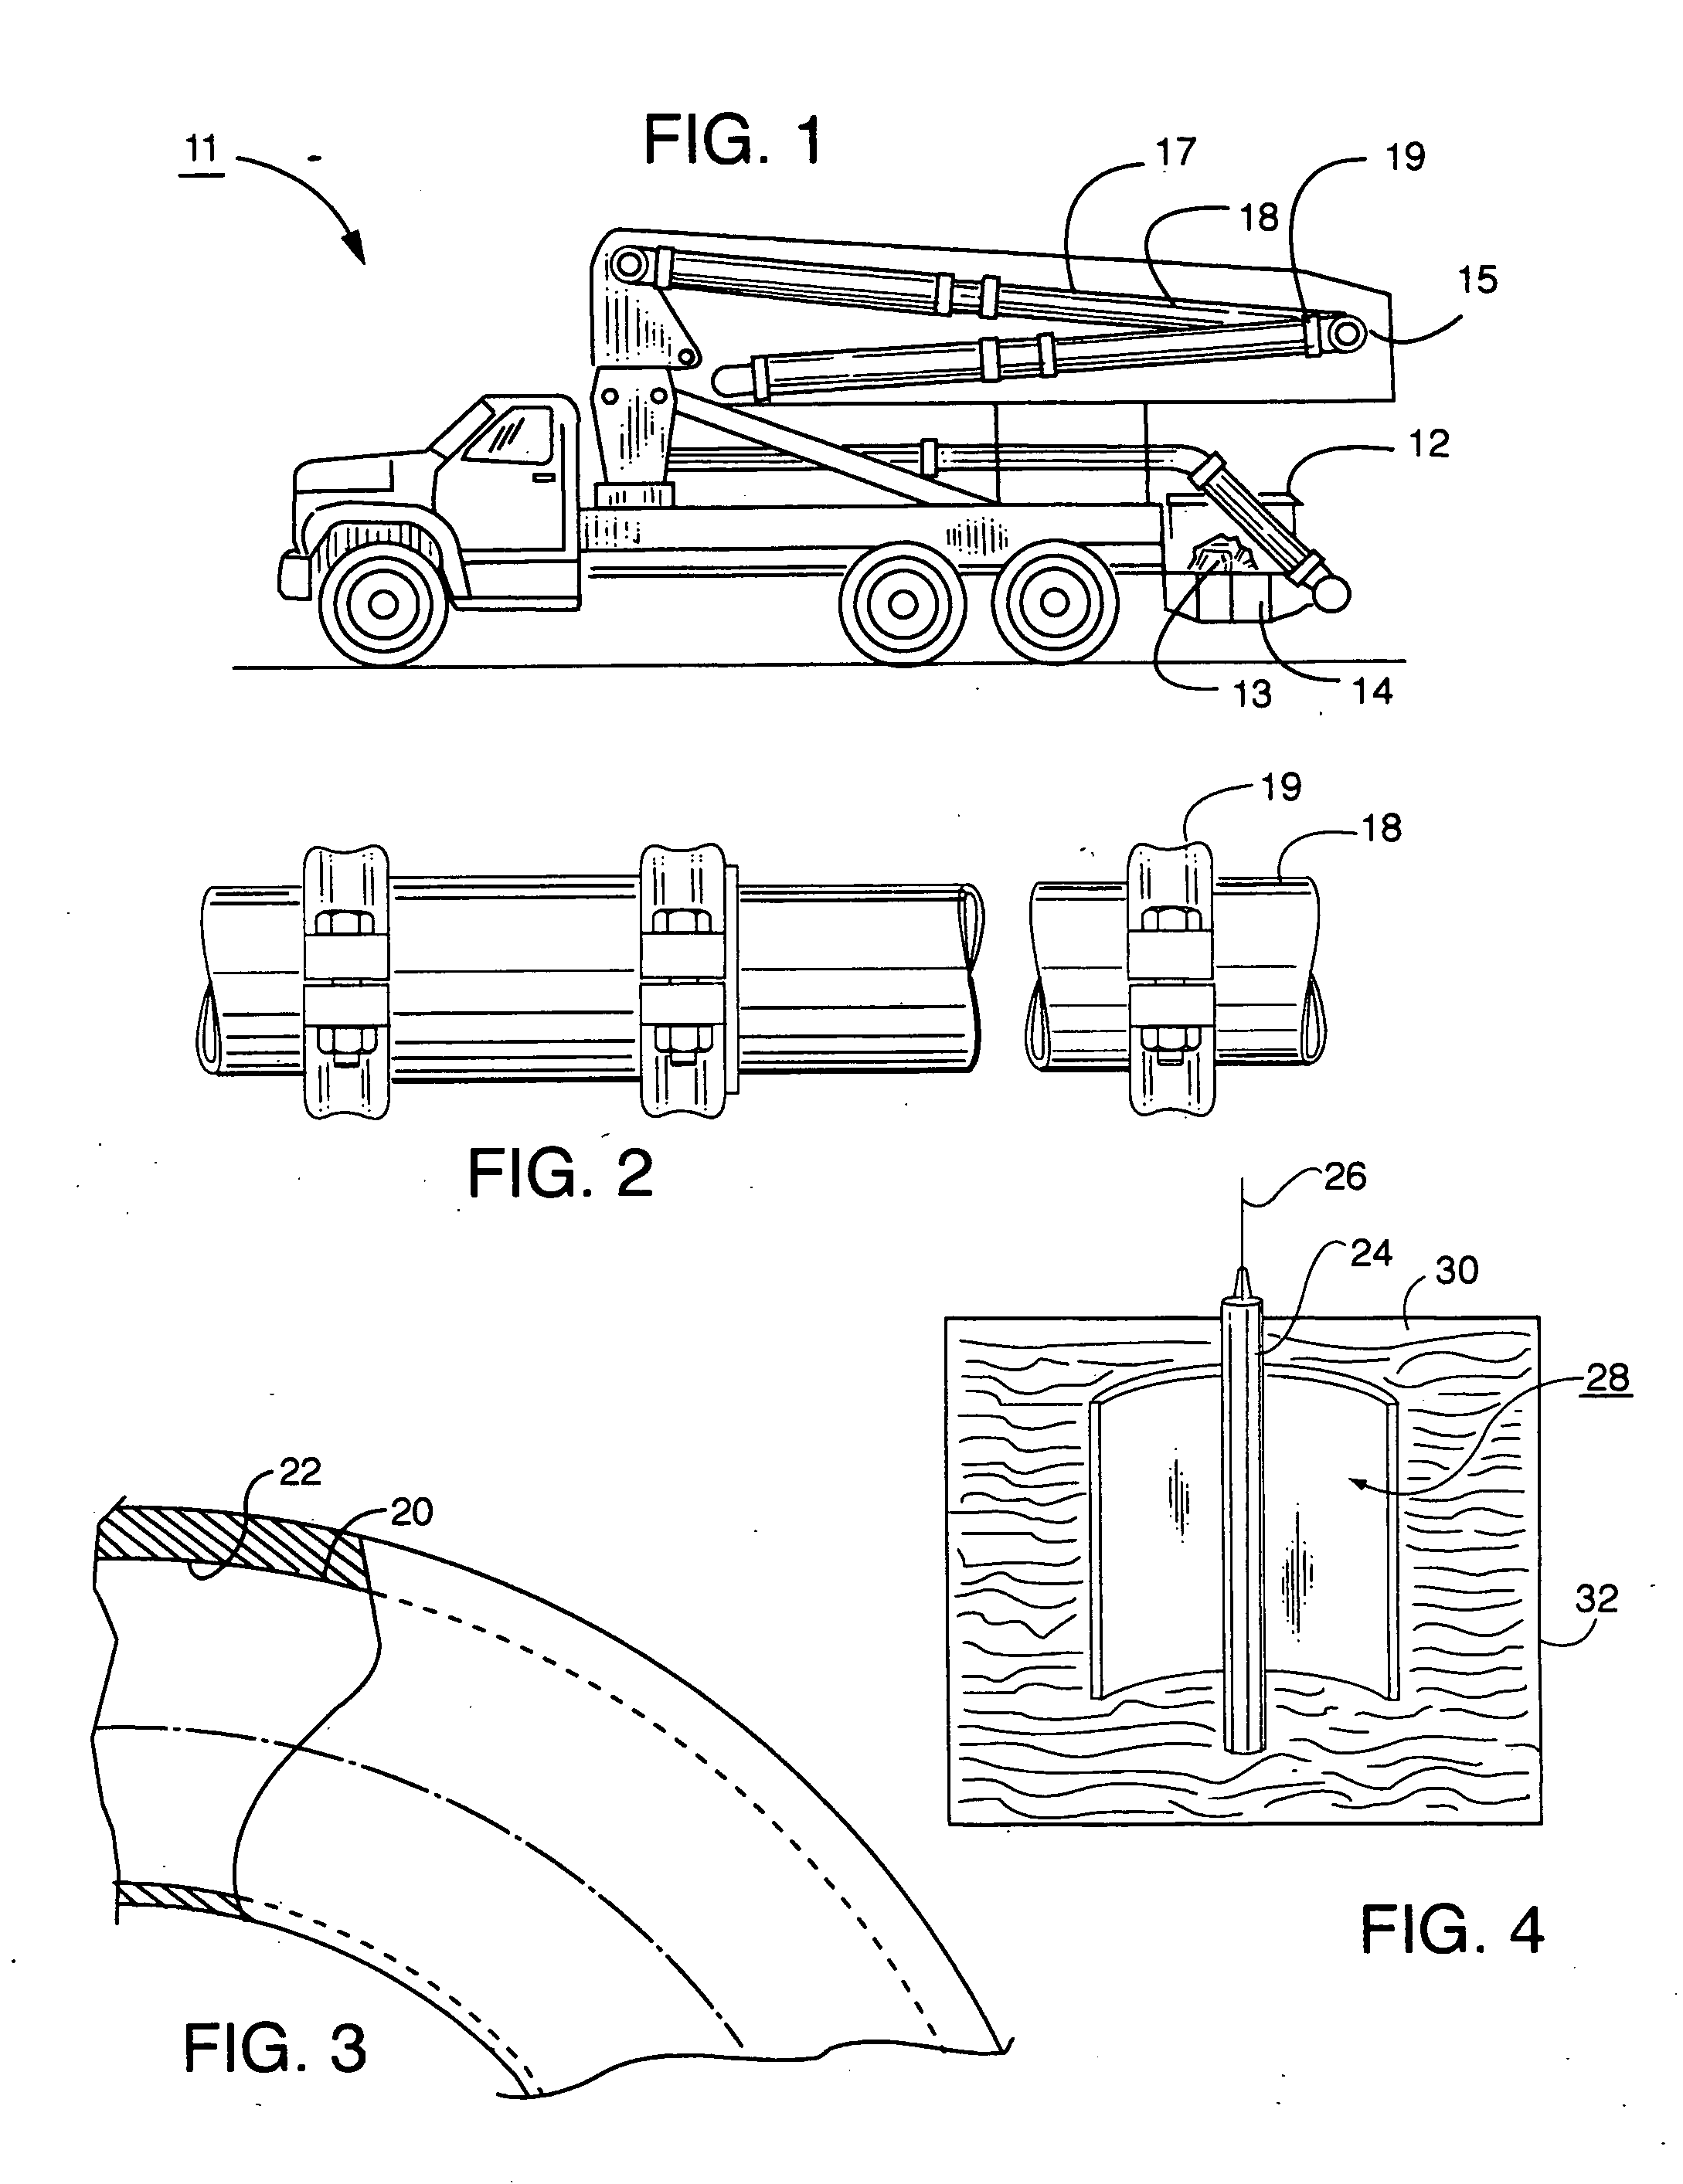 Piping for abrasive slurry transport systems